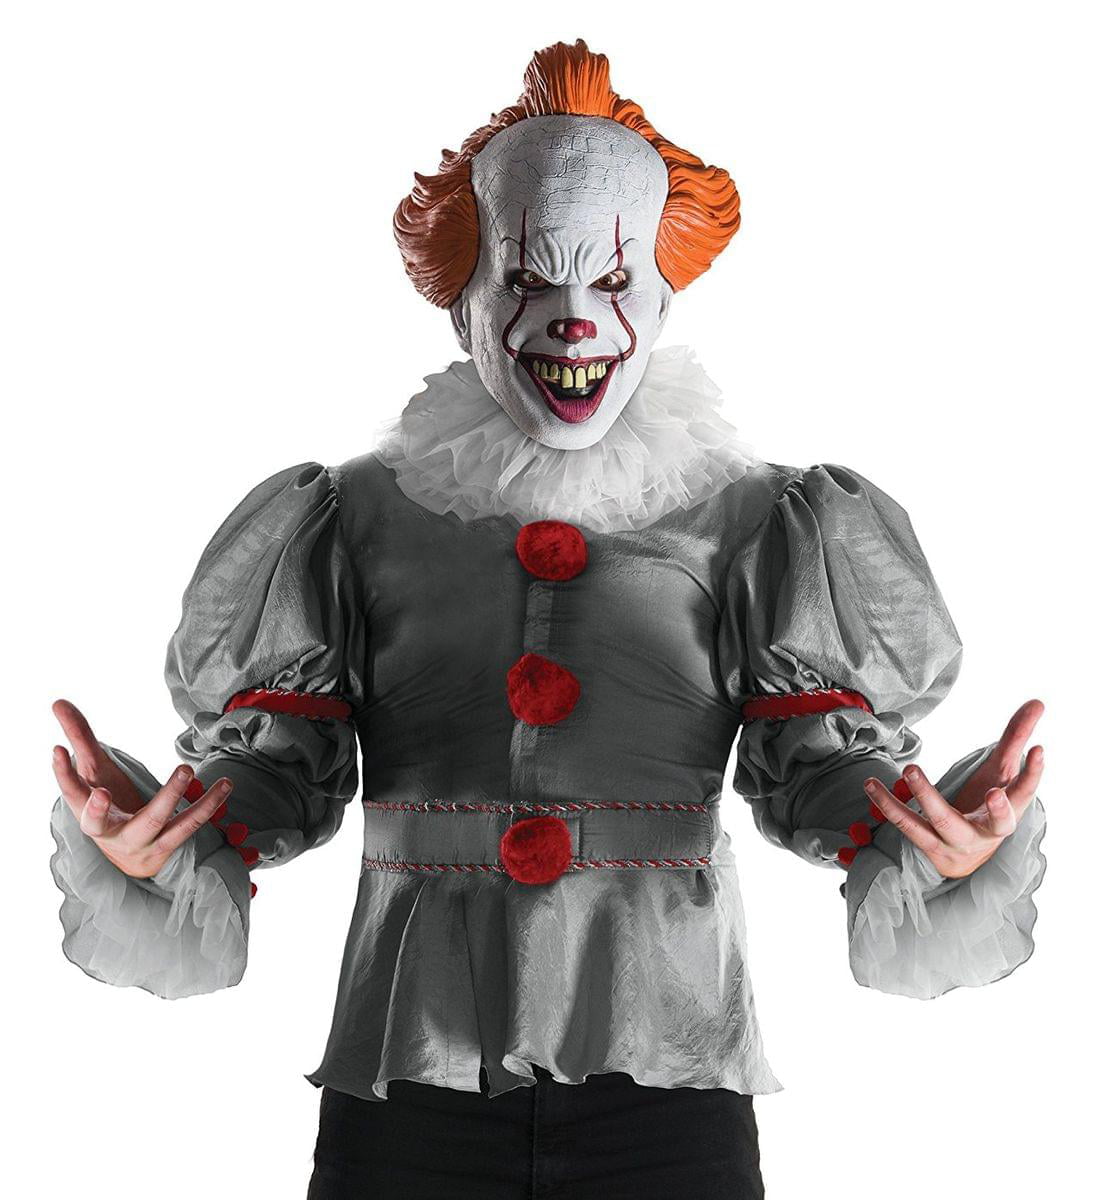 IT (2017 Film) Pennywise Adult Costume, Standard | Walmart Canada